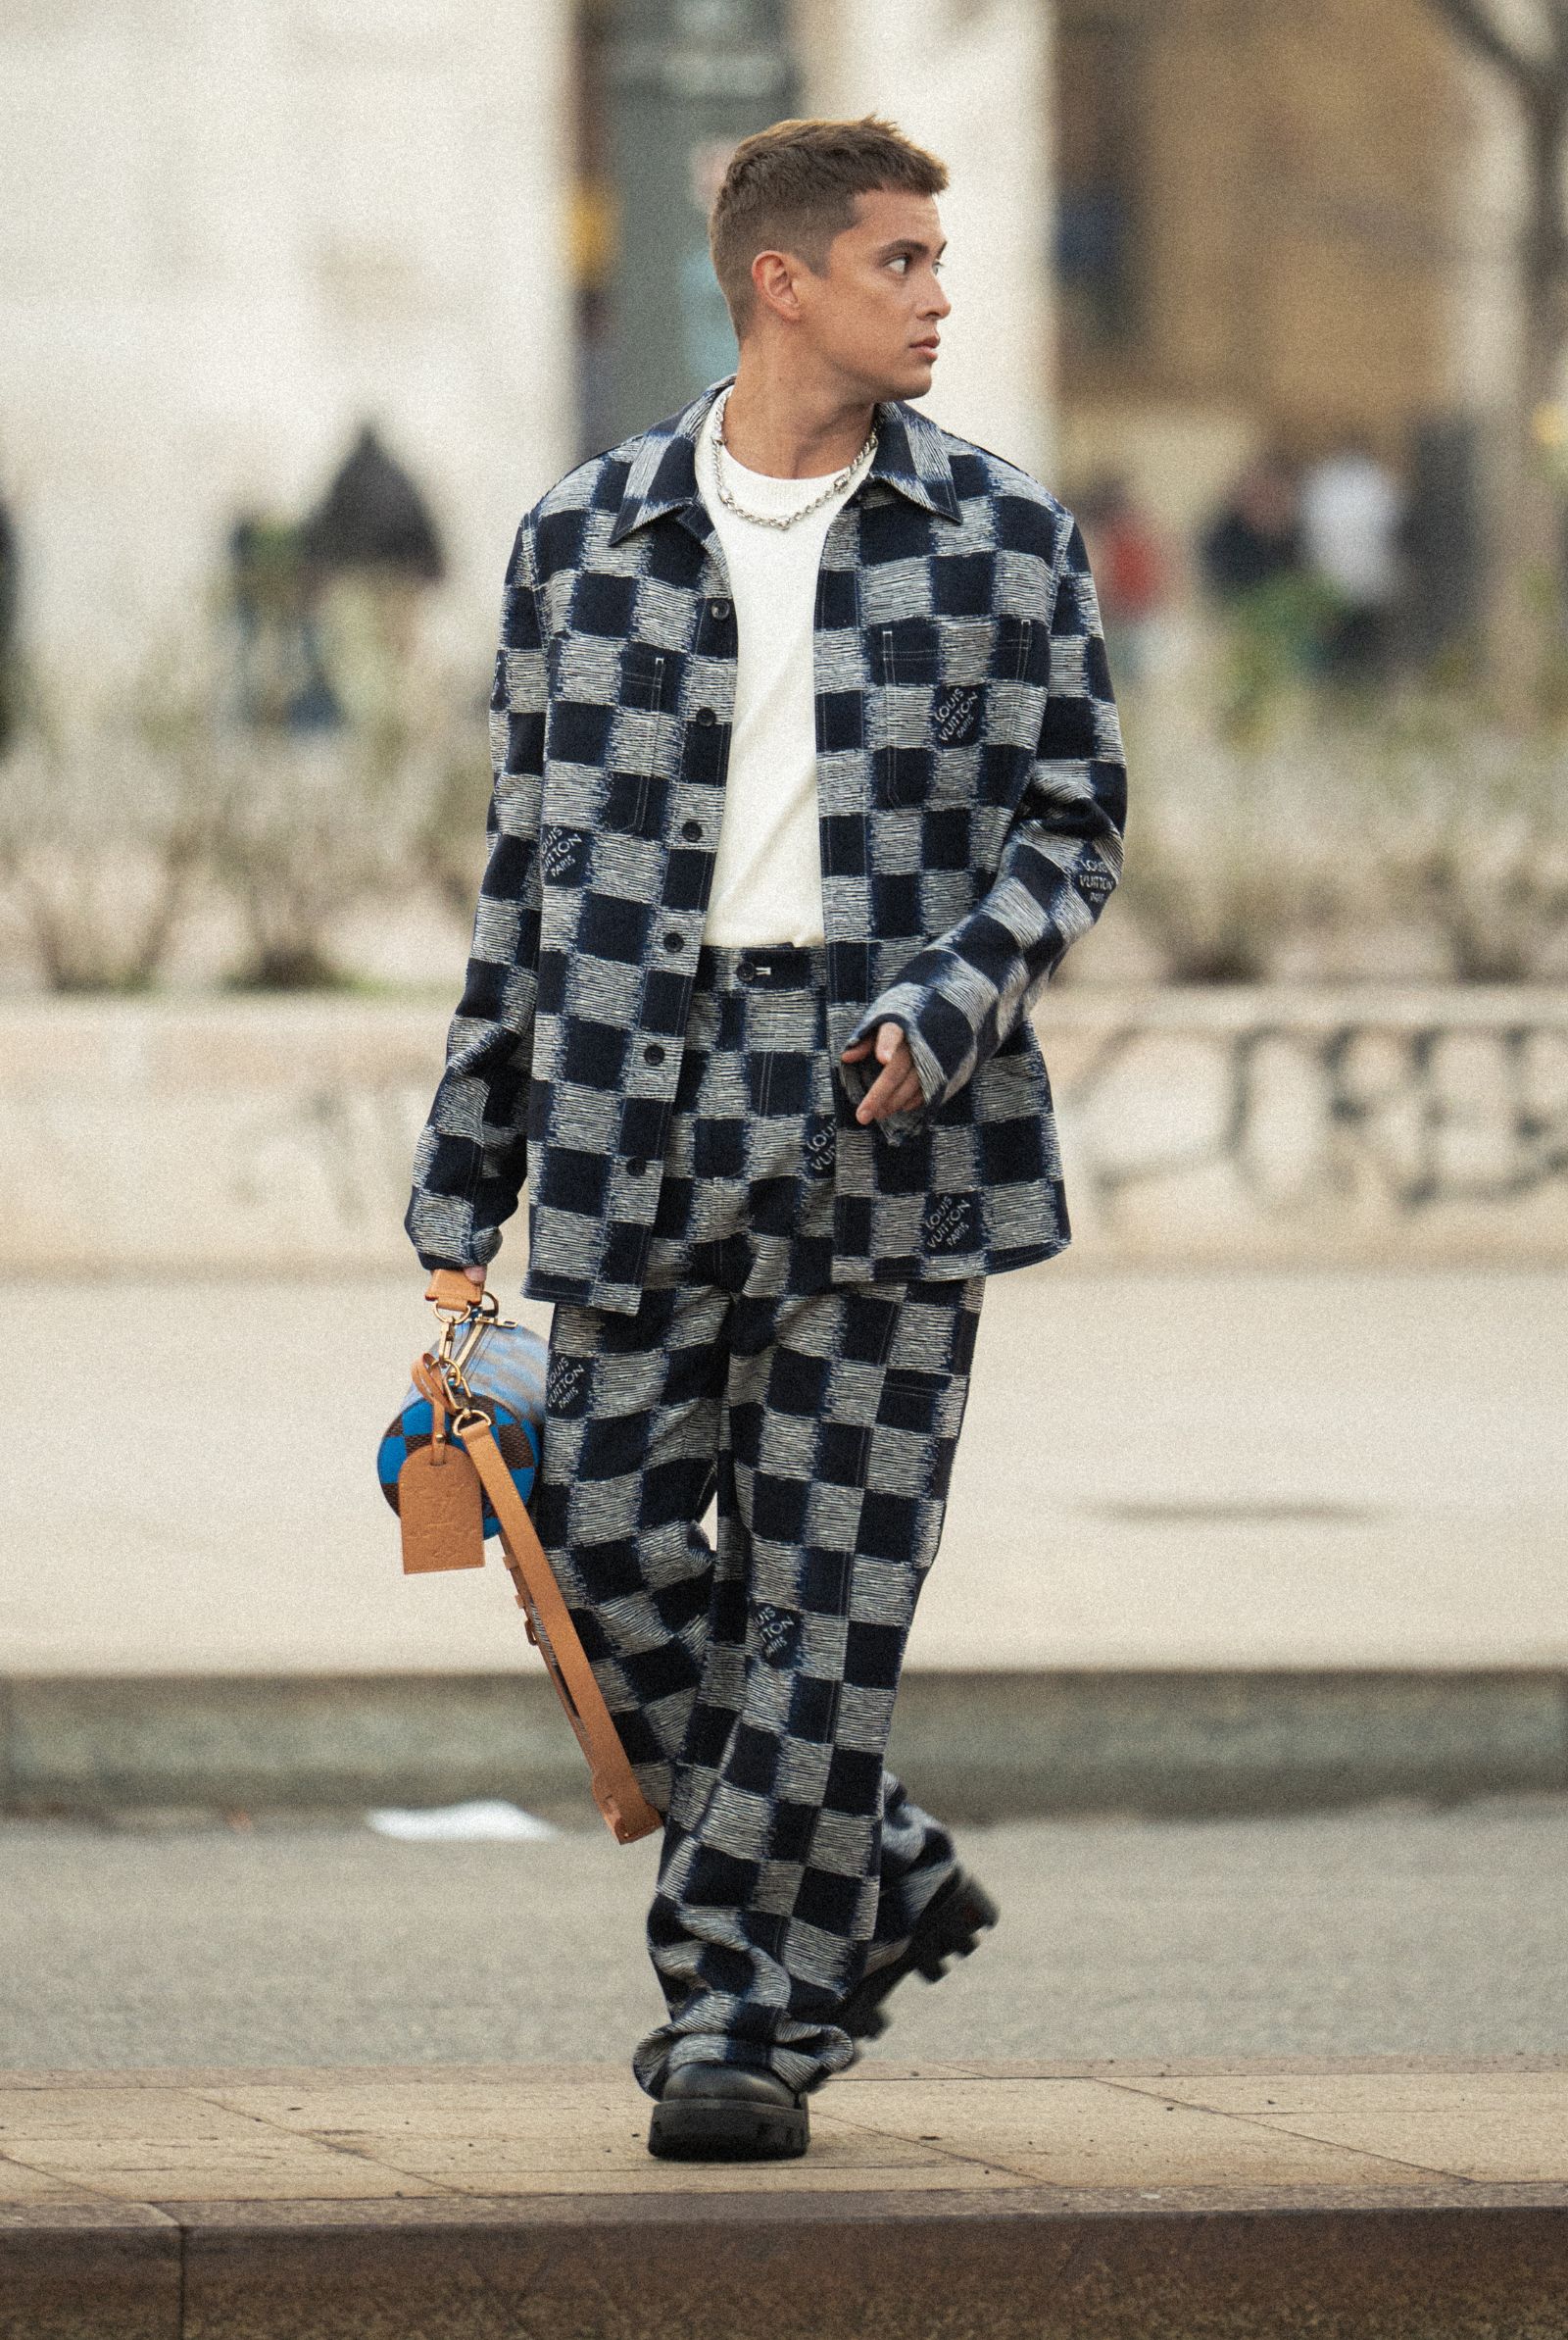 Embracing the charm of the House's Damier pattern, the actor heads to PFW.